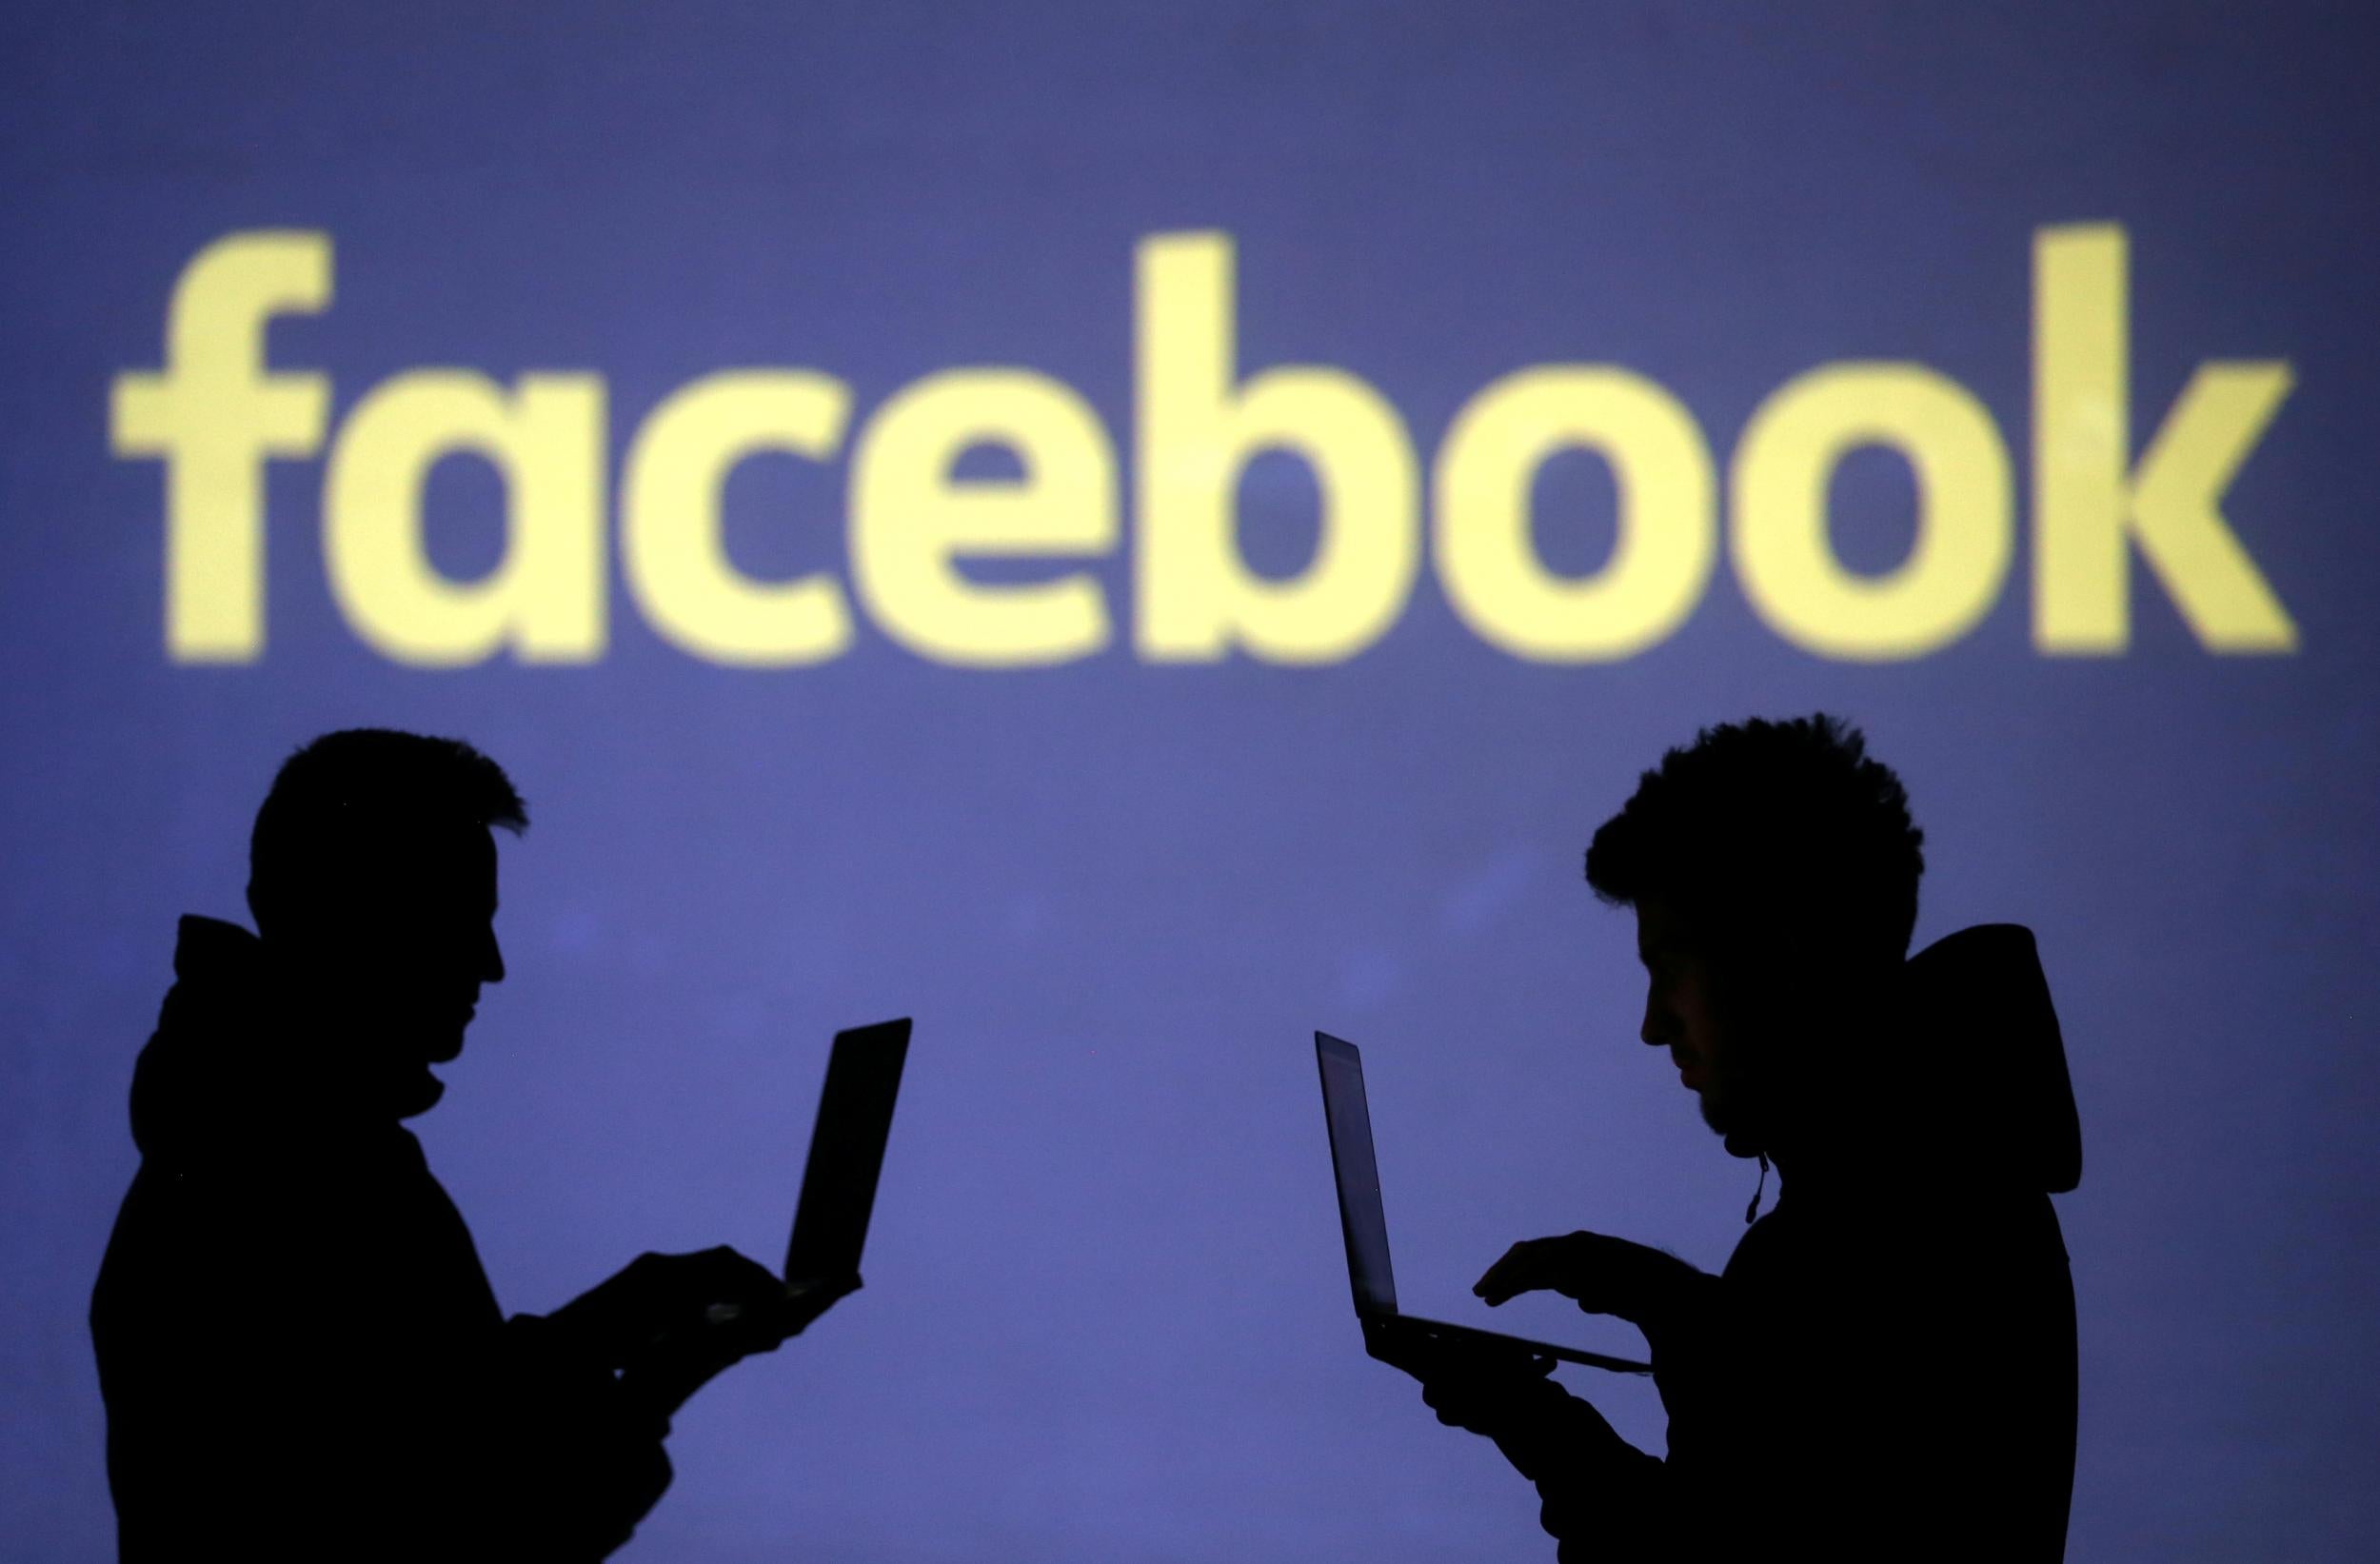 Billions of Facebook users are set to be alerted about potential data abuse